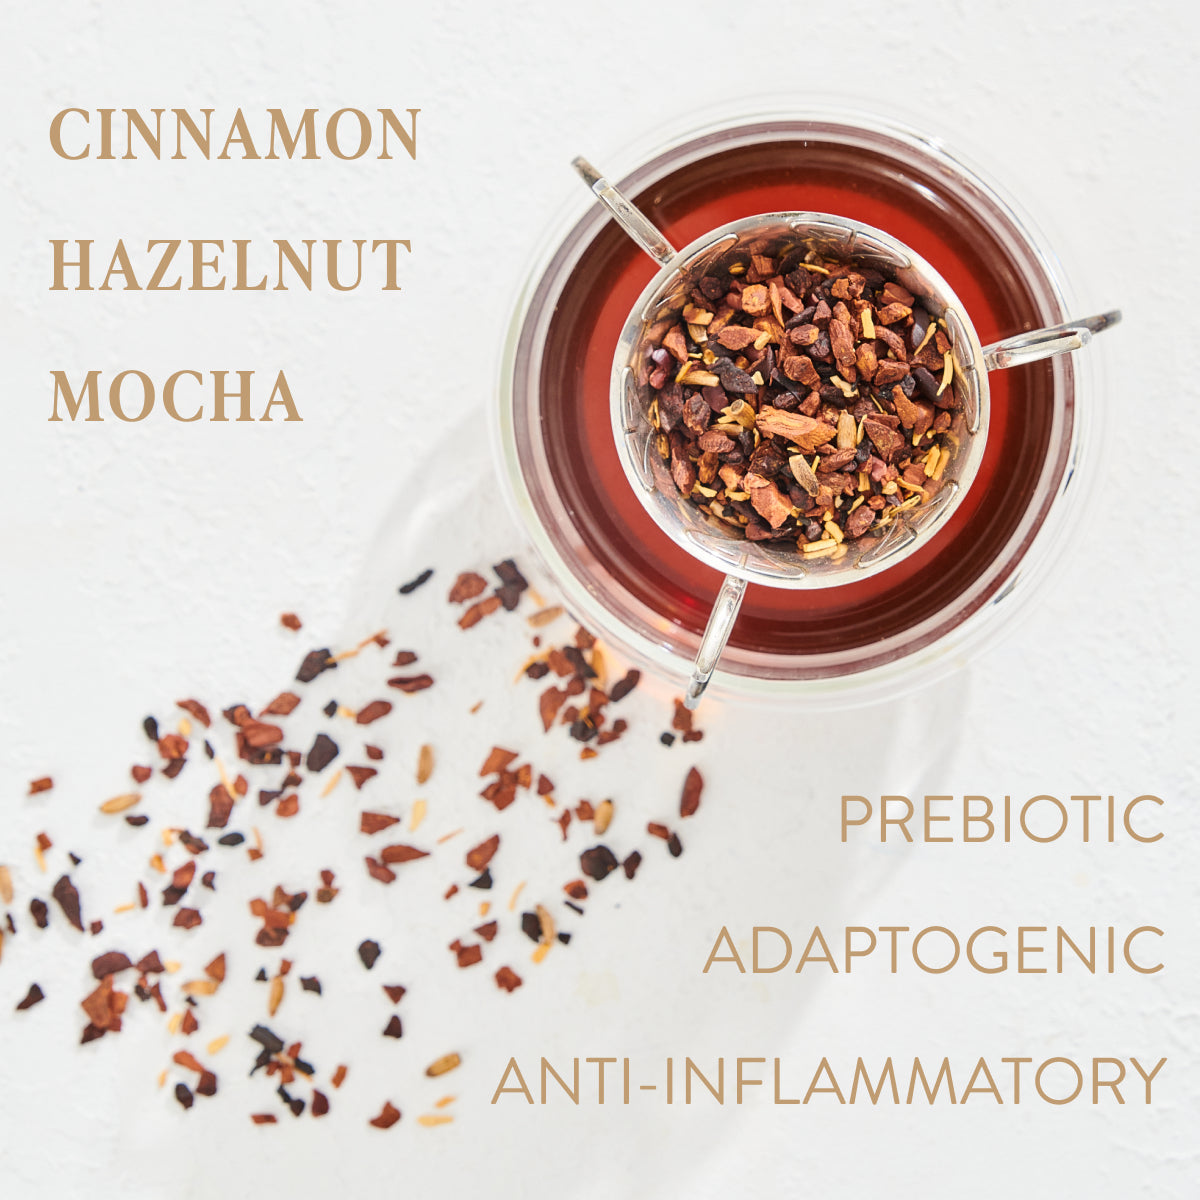 Top-down view of a glass of Queen of the South: Delicious Cocoa Detox Tea with a layer of mixed spices floating. Spices are also scattered outside the glass. The text reads: "QUEEN OF THE SOUTH: DELICIOUS COCOA DETOX TEA," "PREBIOTIC," "ADAPTOGENIC," and "ANTI-INFLAMMATORY" against a white background, reminiscent of an Organic Tea blend from Magic Hour.